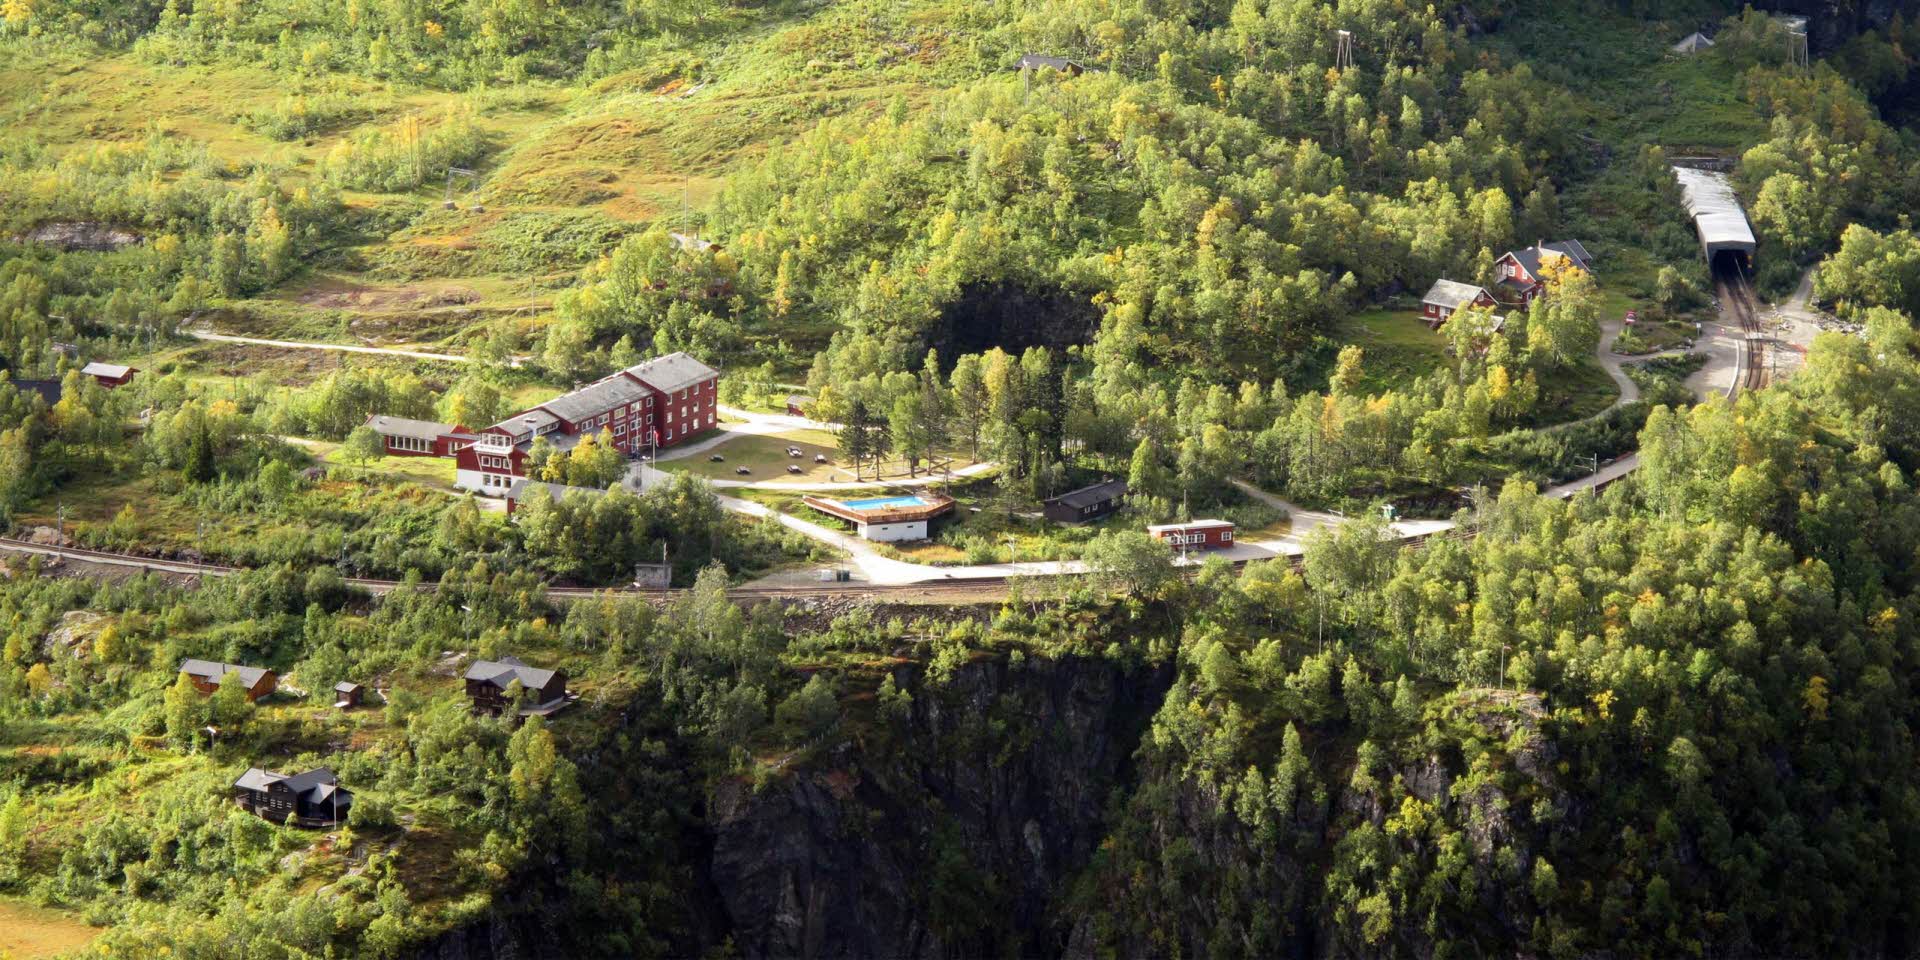 Vatnahalsen and the surroundings seen from above in summer